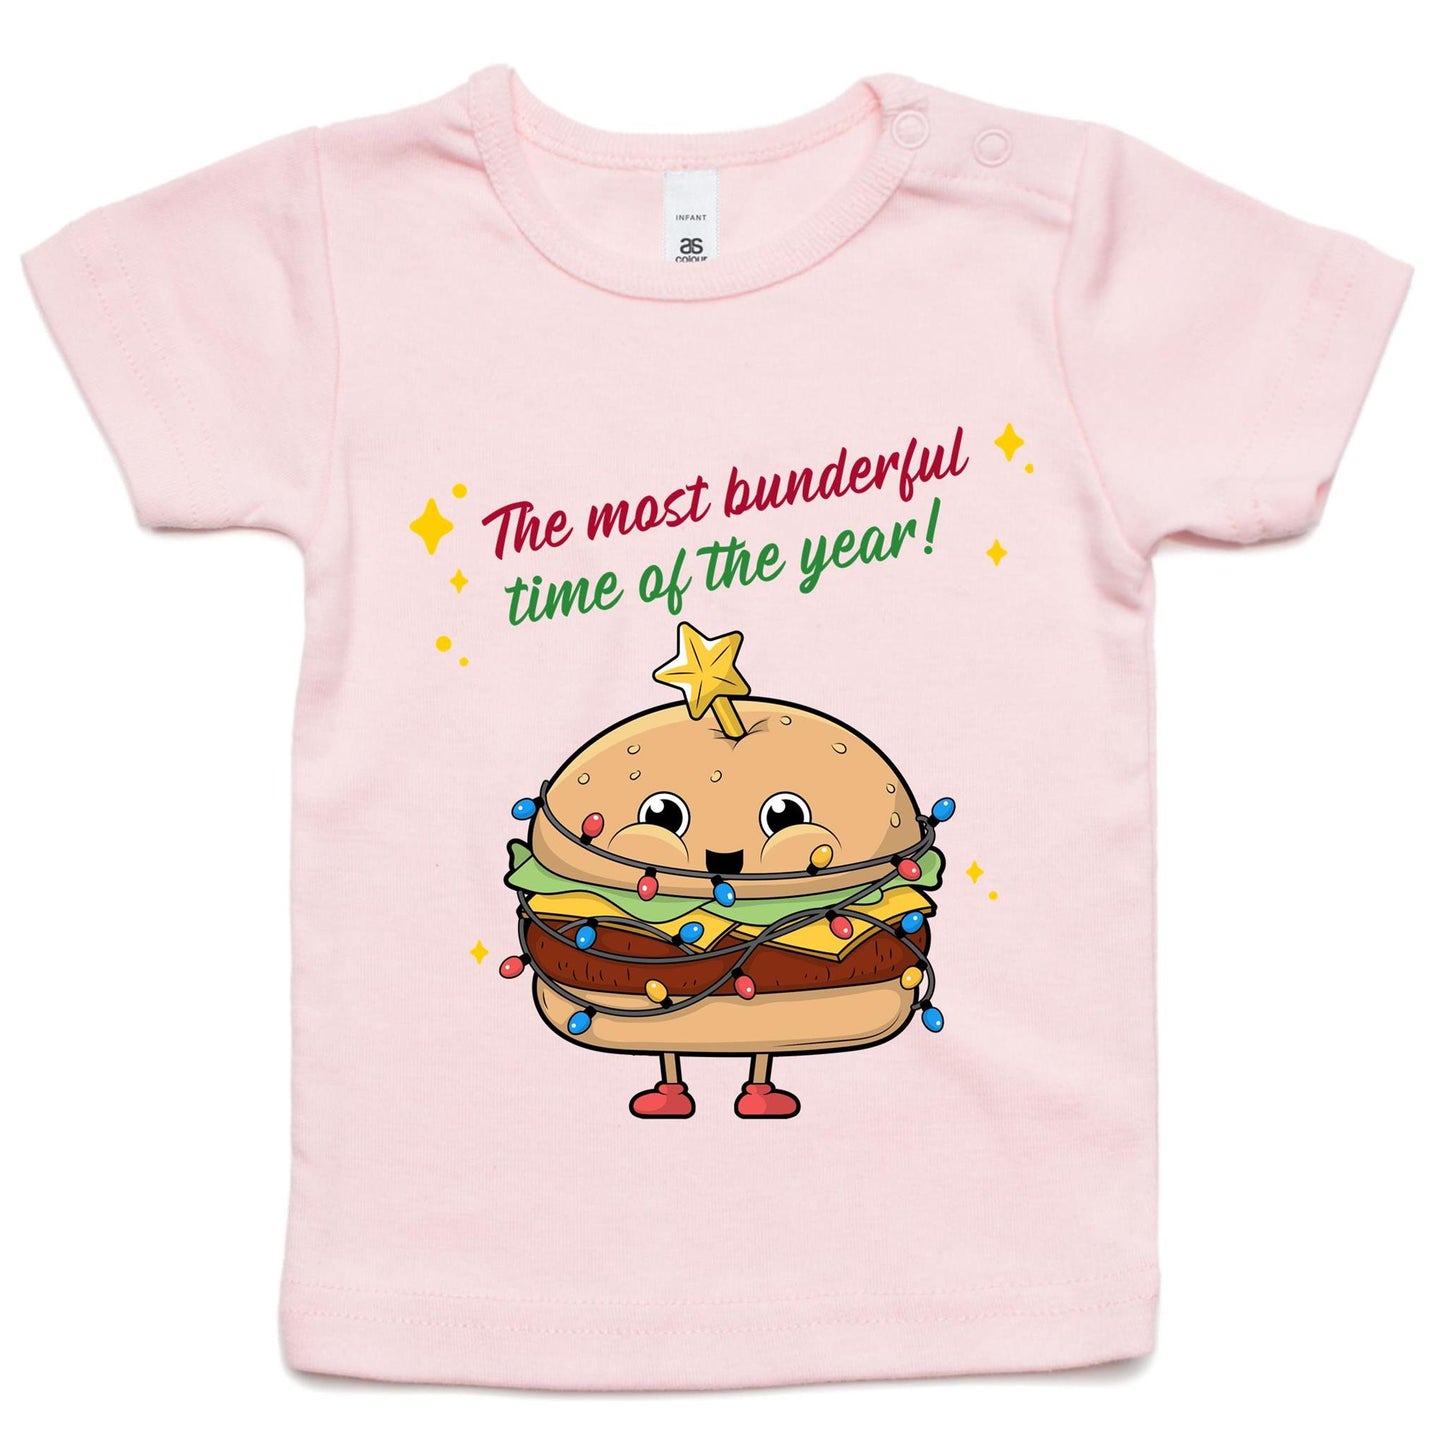 The Most Bunderful Time Of The Year - Baby T-shirt Pink Christmas Baby T-shirt Merry Christmas